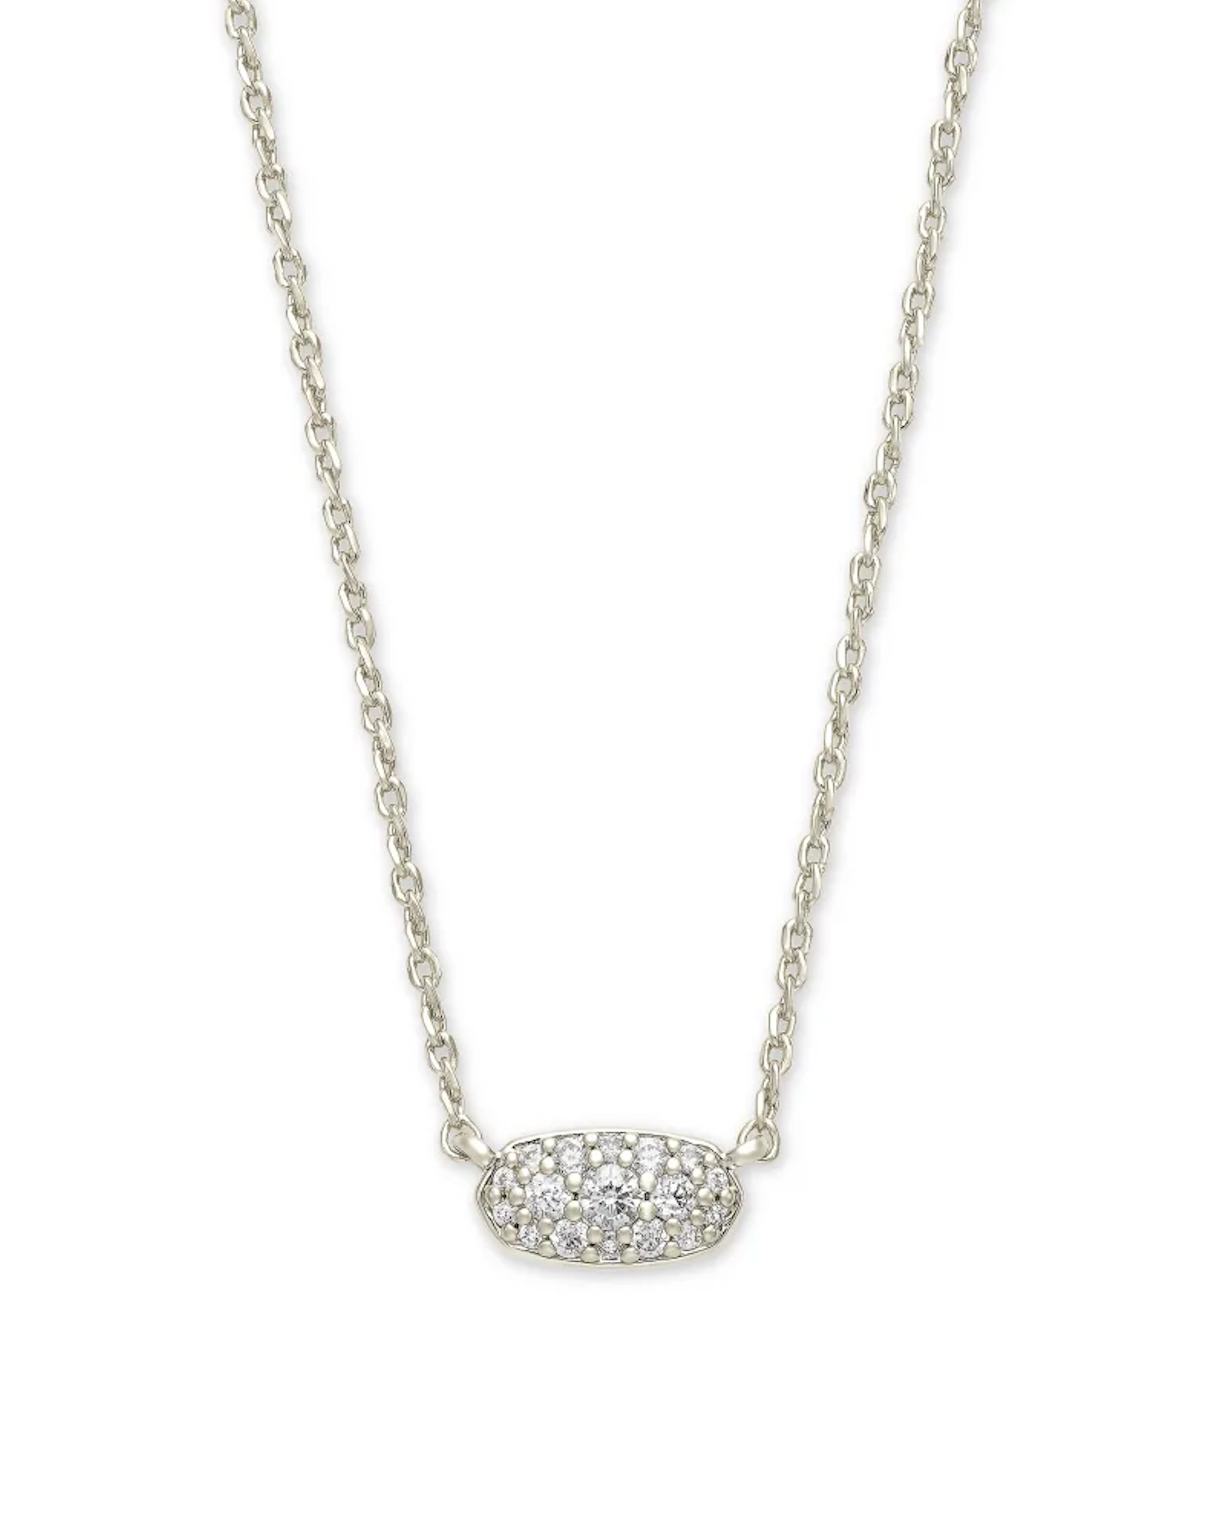 KENDRA SCOTT GRAYSON CRYSTAL PENDENT NECKLACE RHOD METAL WHITE